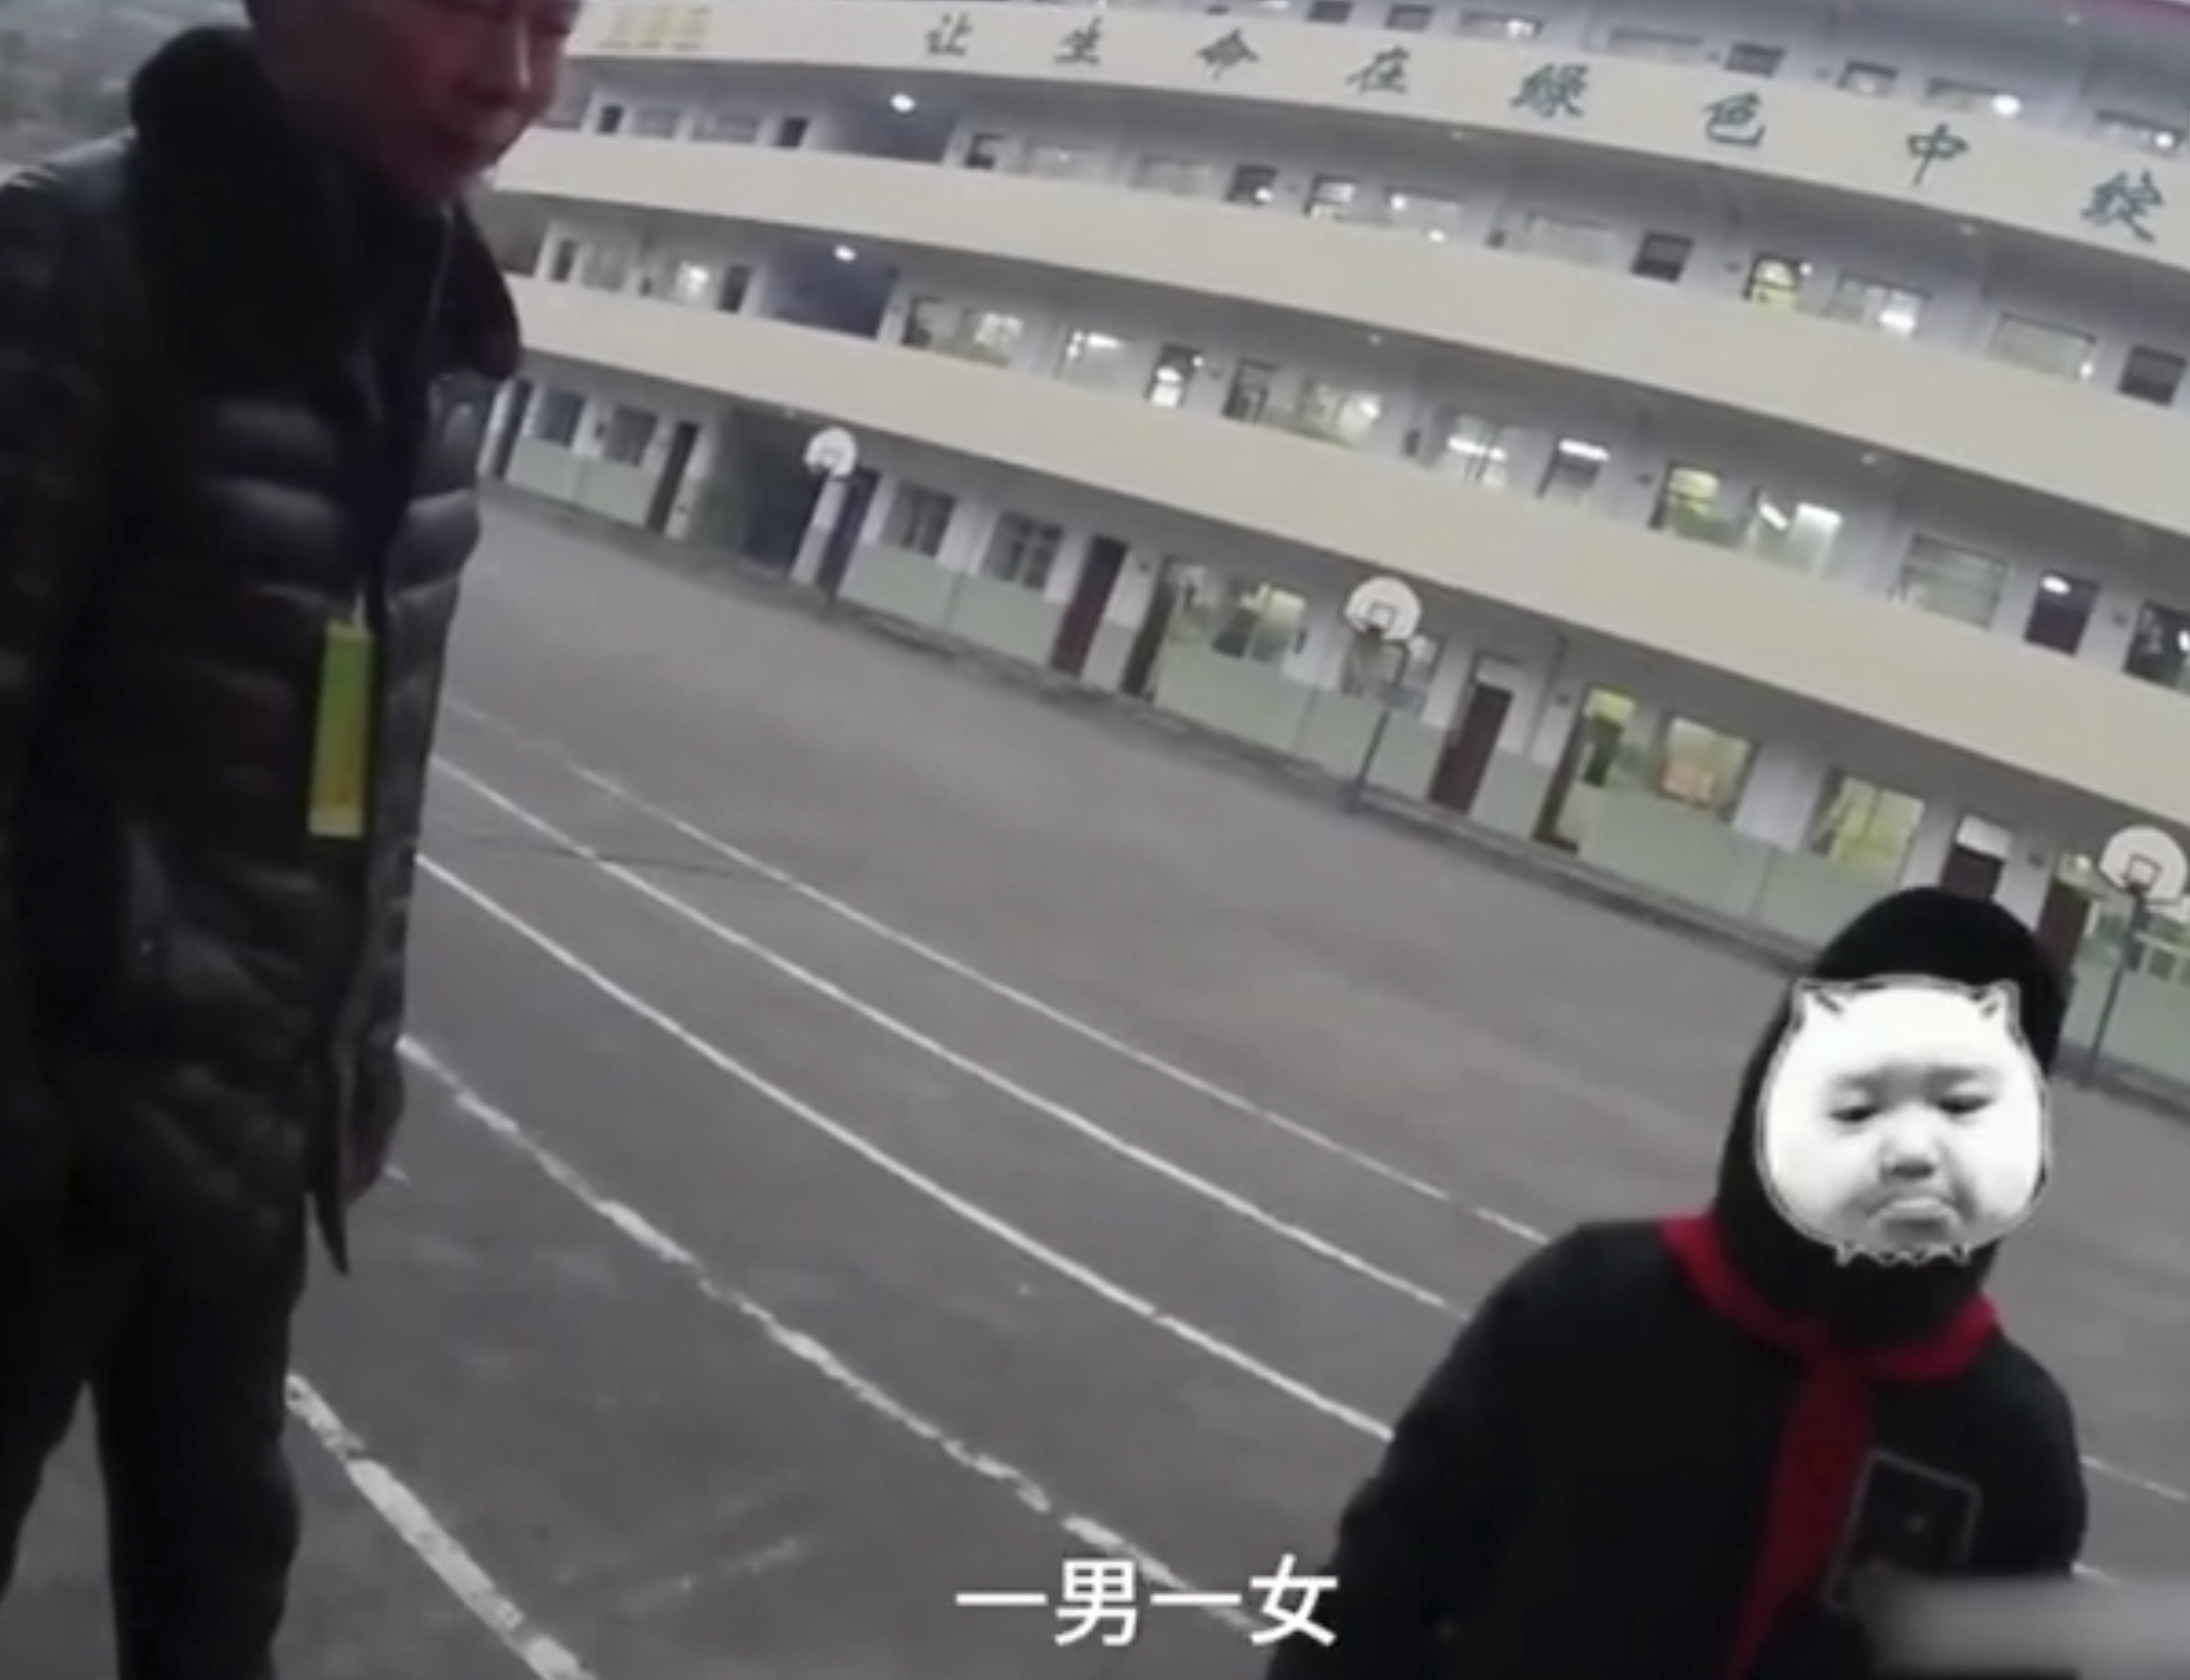 Police in Chongqing shared a video of a 10-year-old child recounting an imagined kidnapping story on social media. Photo: Weibo